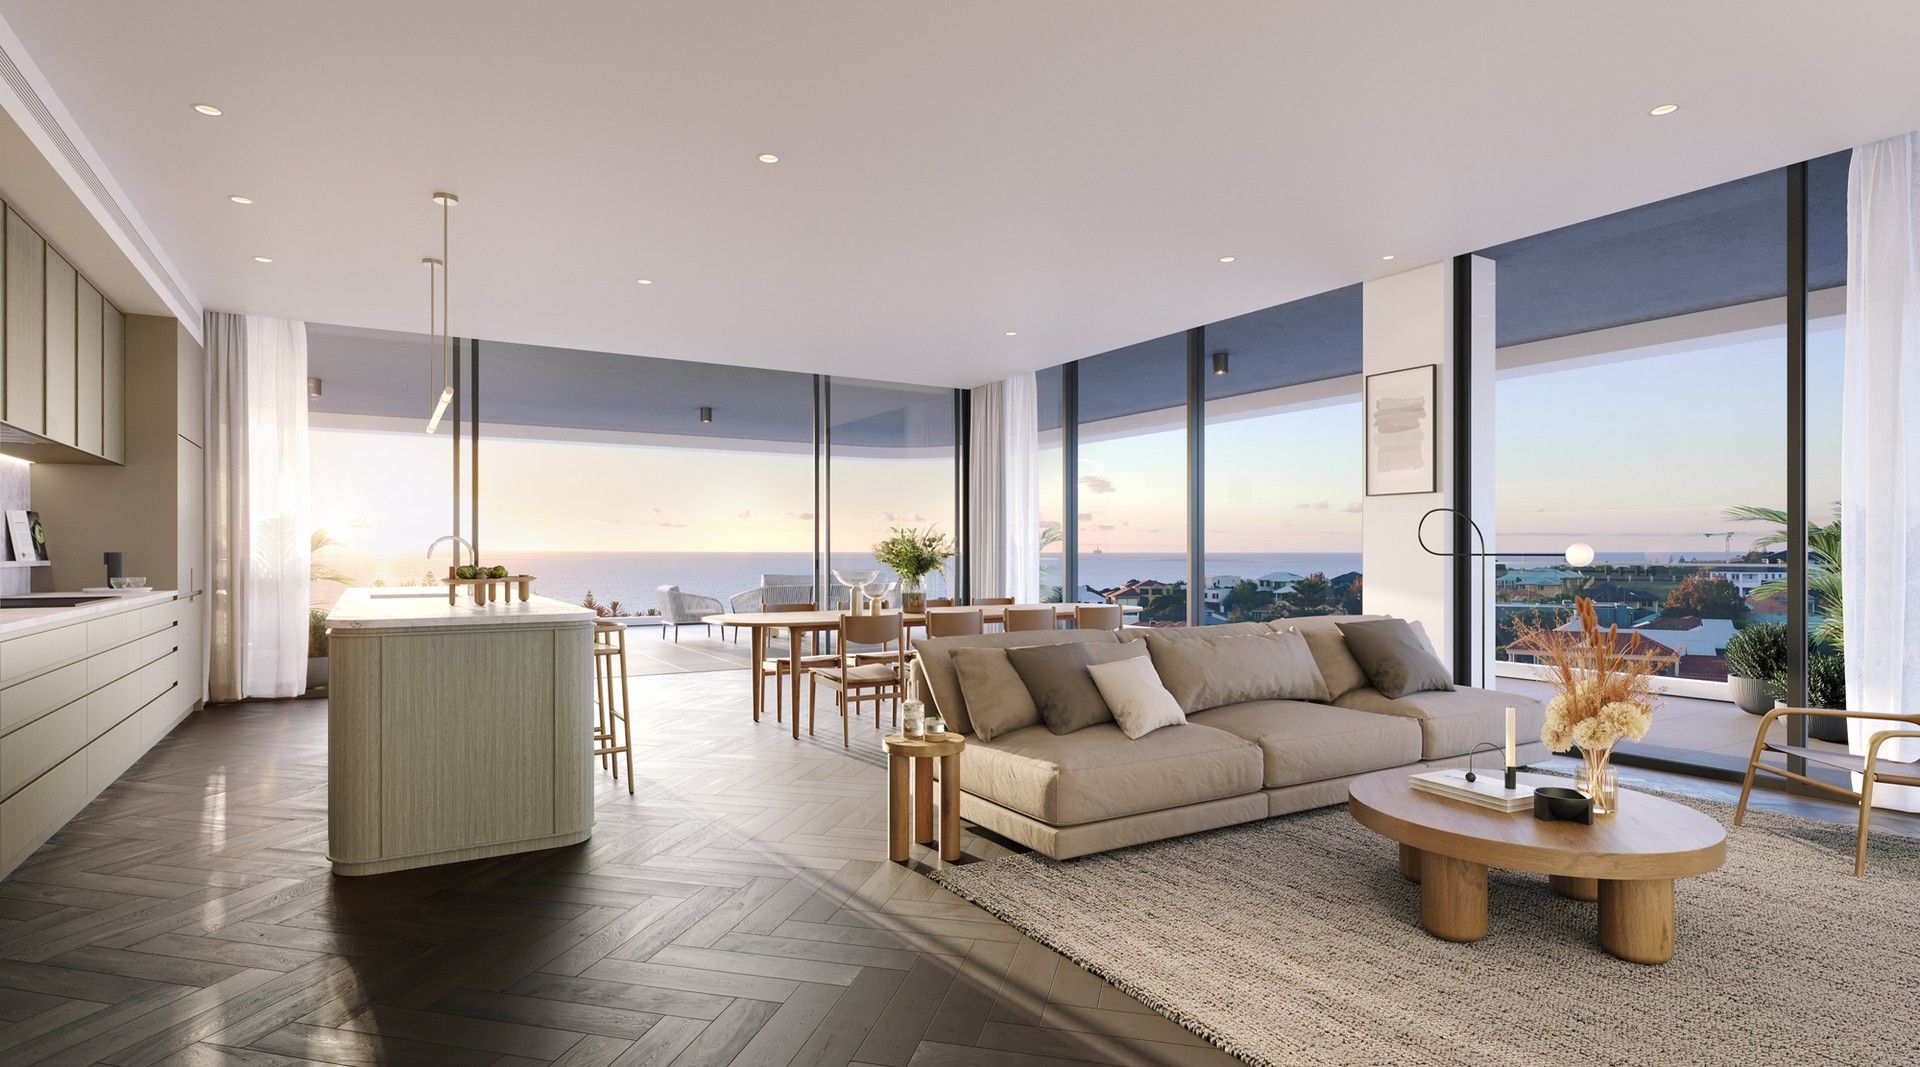 3 bedrooms New Apartments / Off the Plan in 2201/21 McCabe Street NORTH FREMANTLE WA, 6159